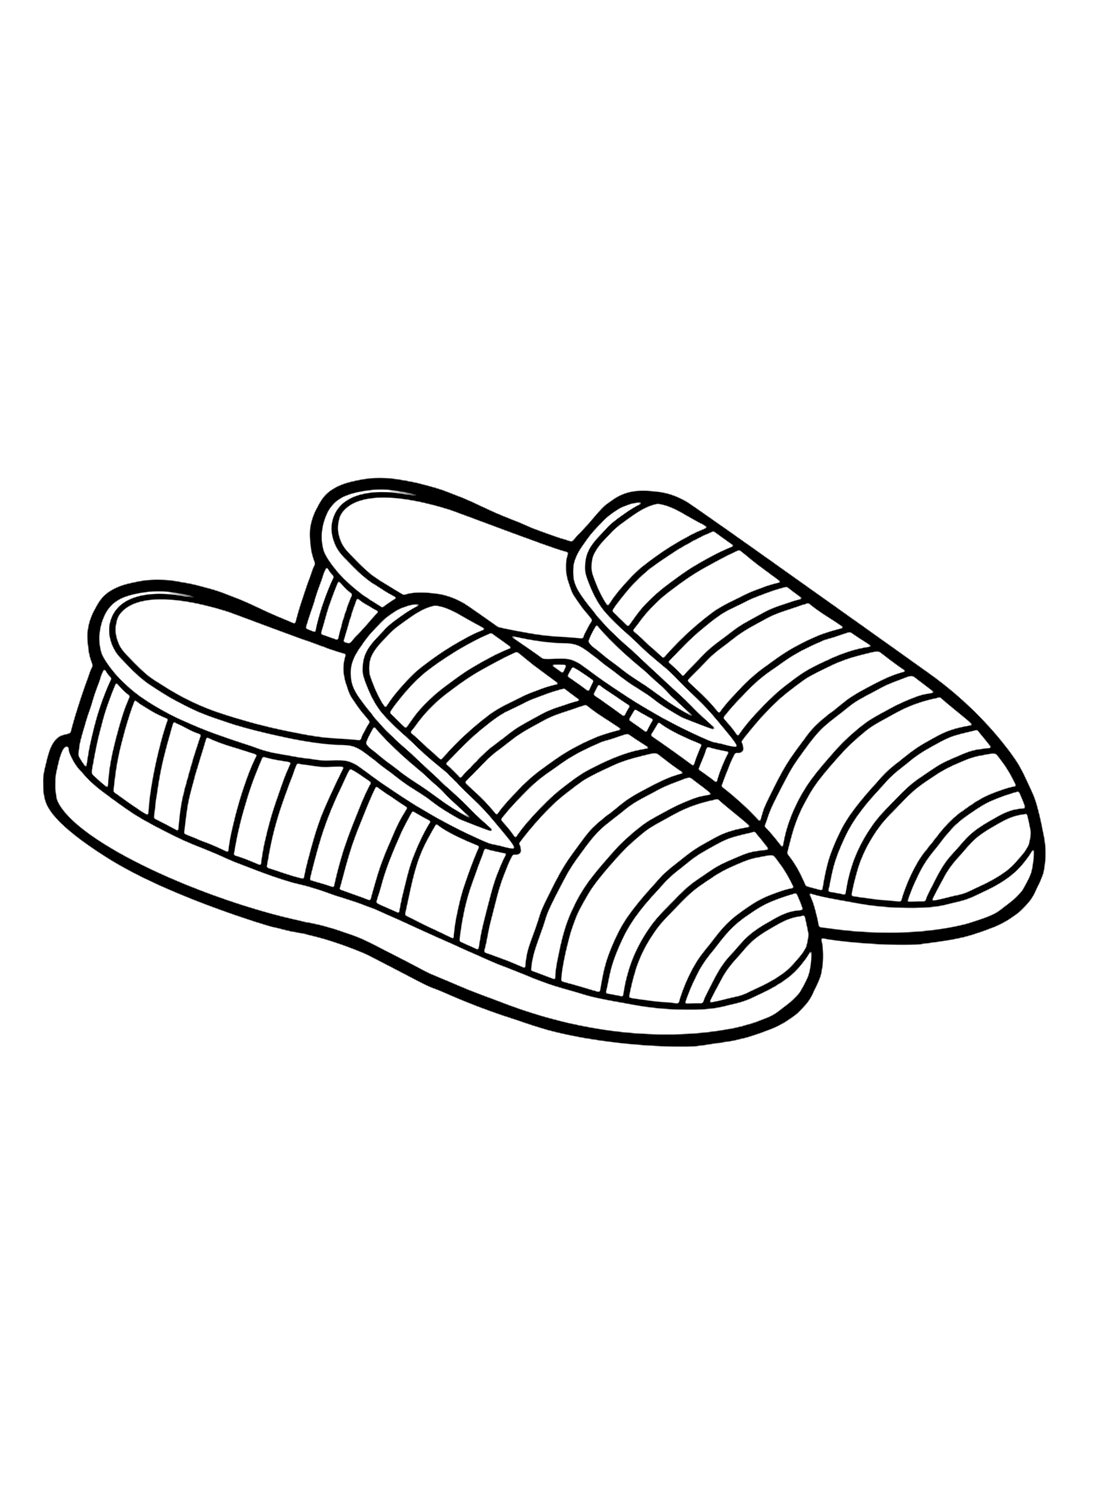 Slip-on shoes coloring page